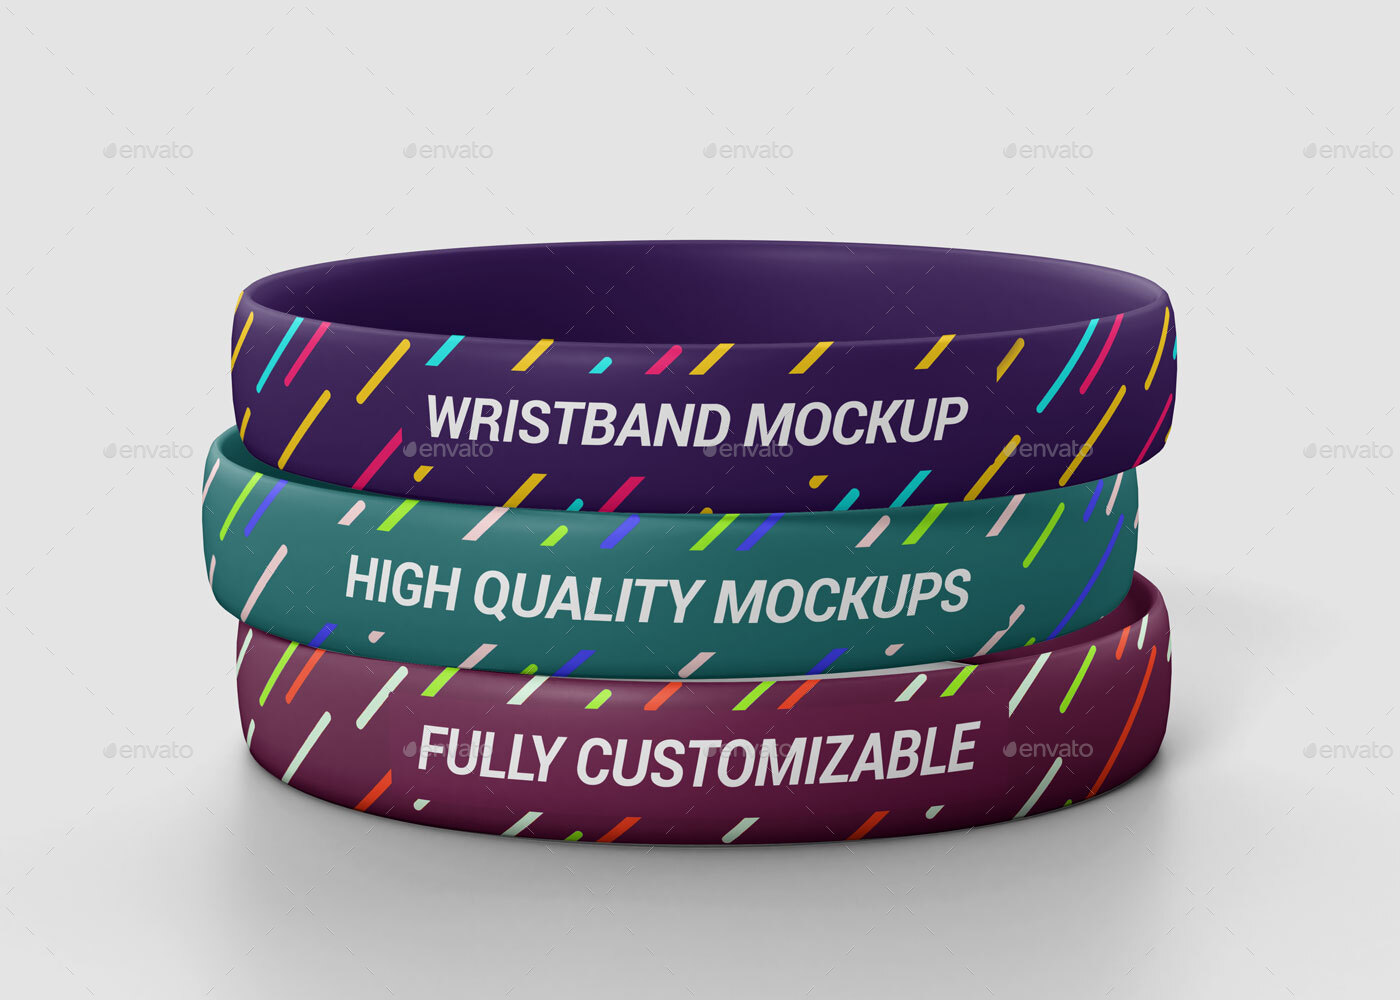 Download Rubber Wristband Mockup by Pixelica21 | GraphicRiver